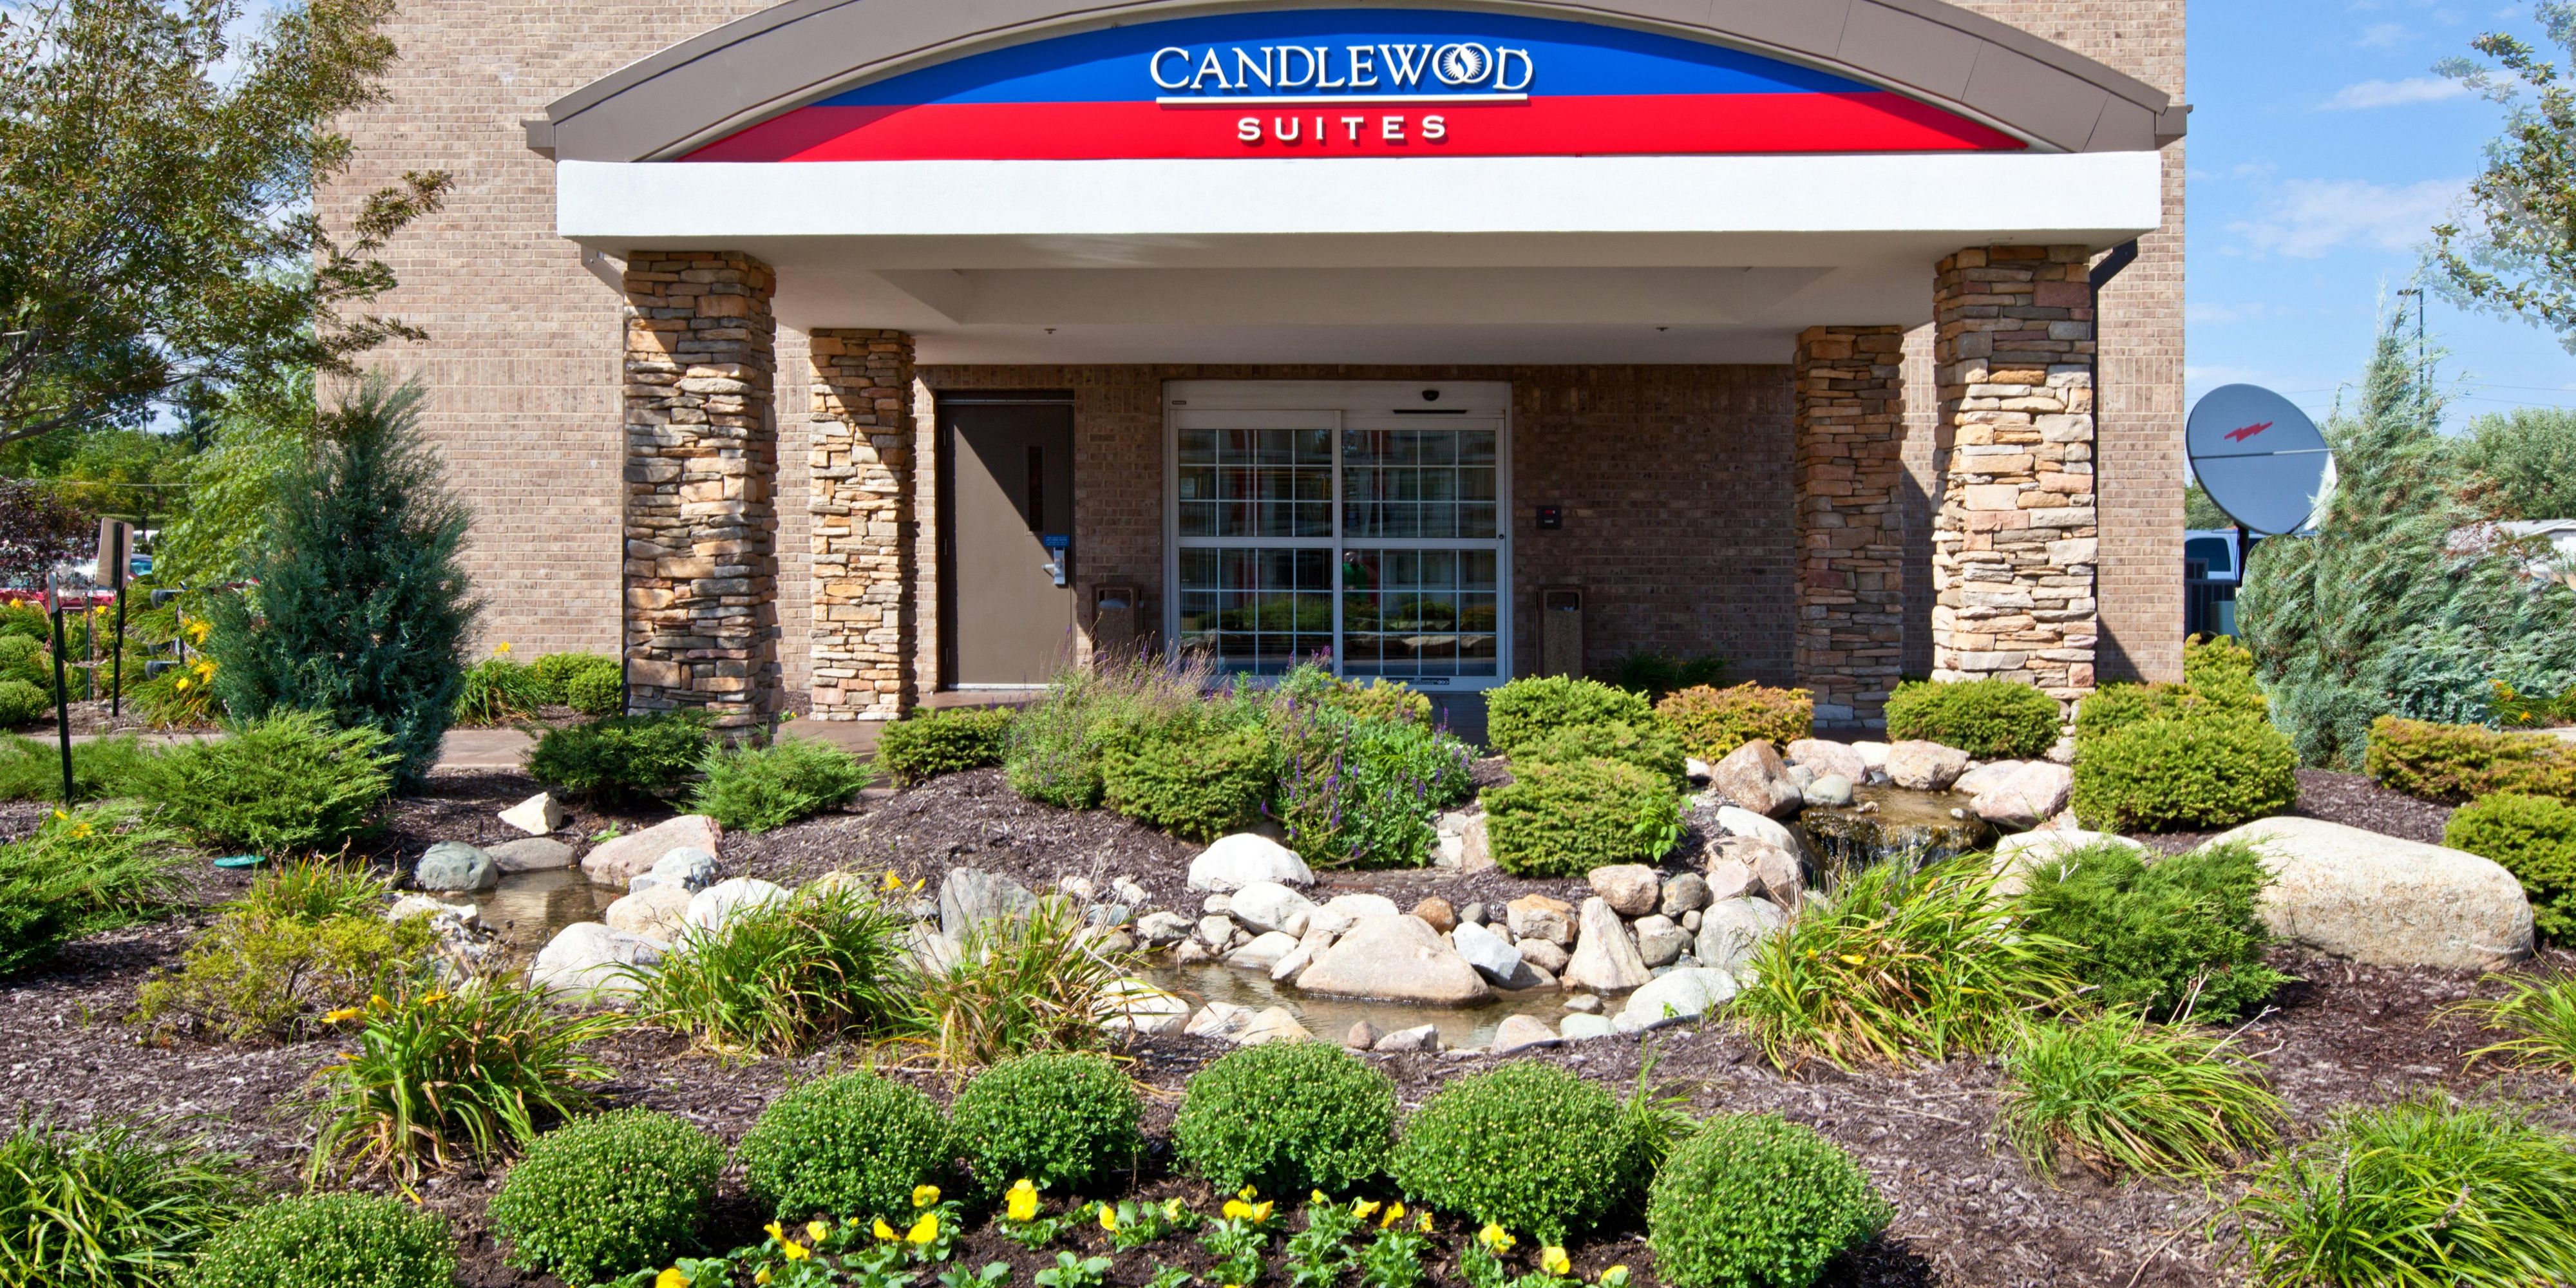 Candlewood Suites Indianapolis 2531857456 2x1